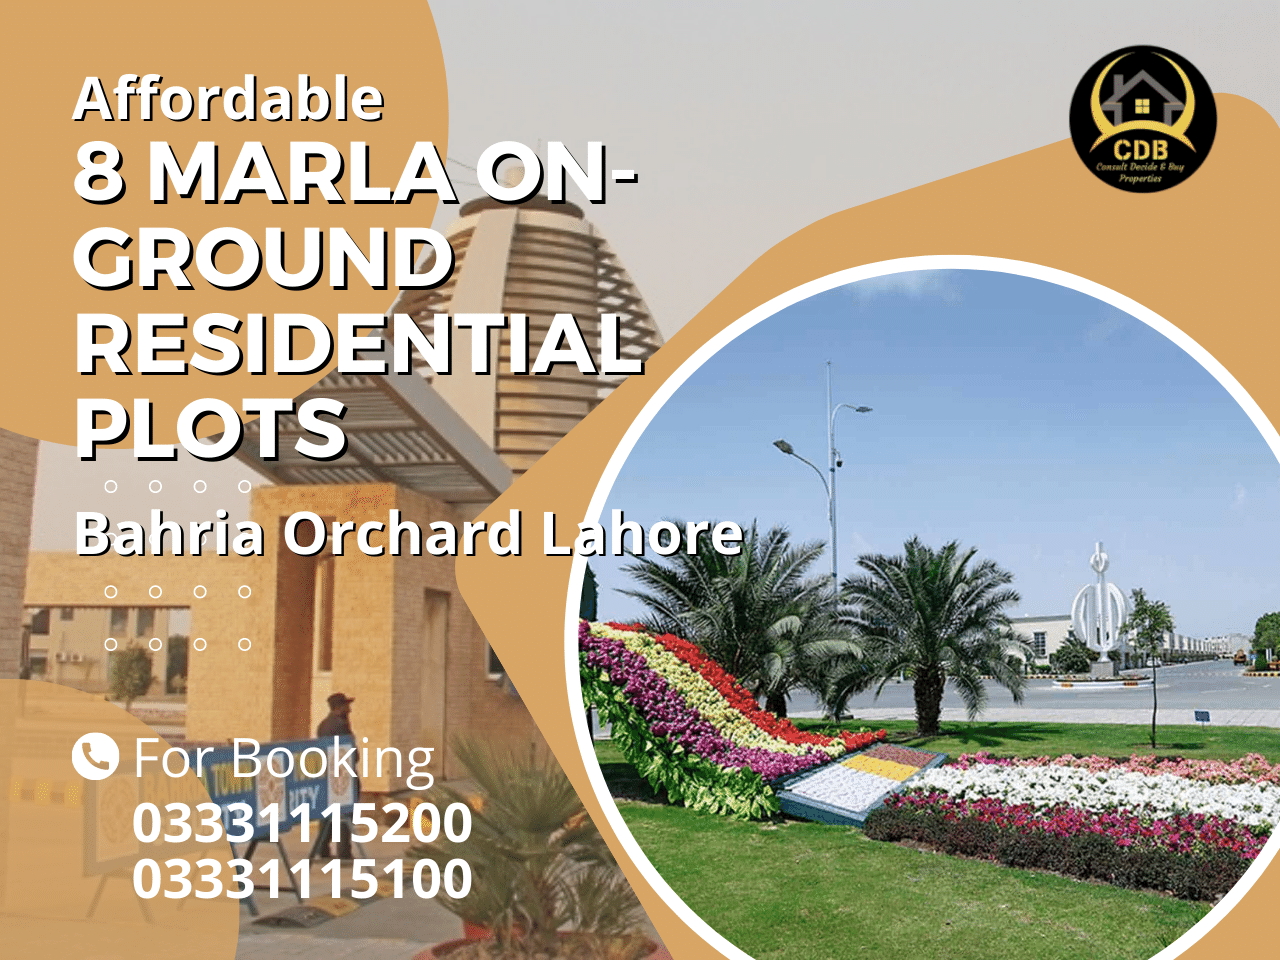 8 Marla On-Ground Residential Plots in Bahria Orchard Lahore